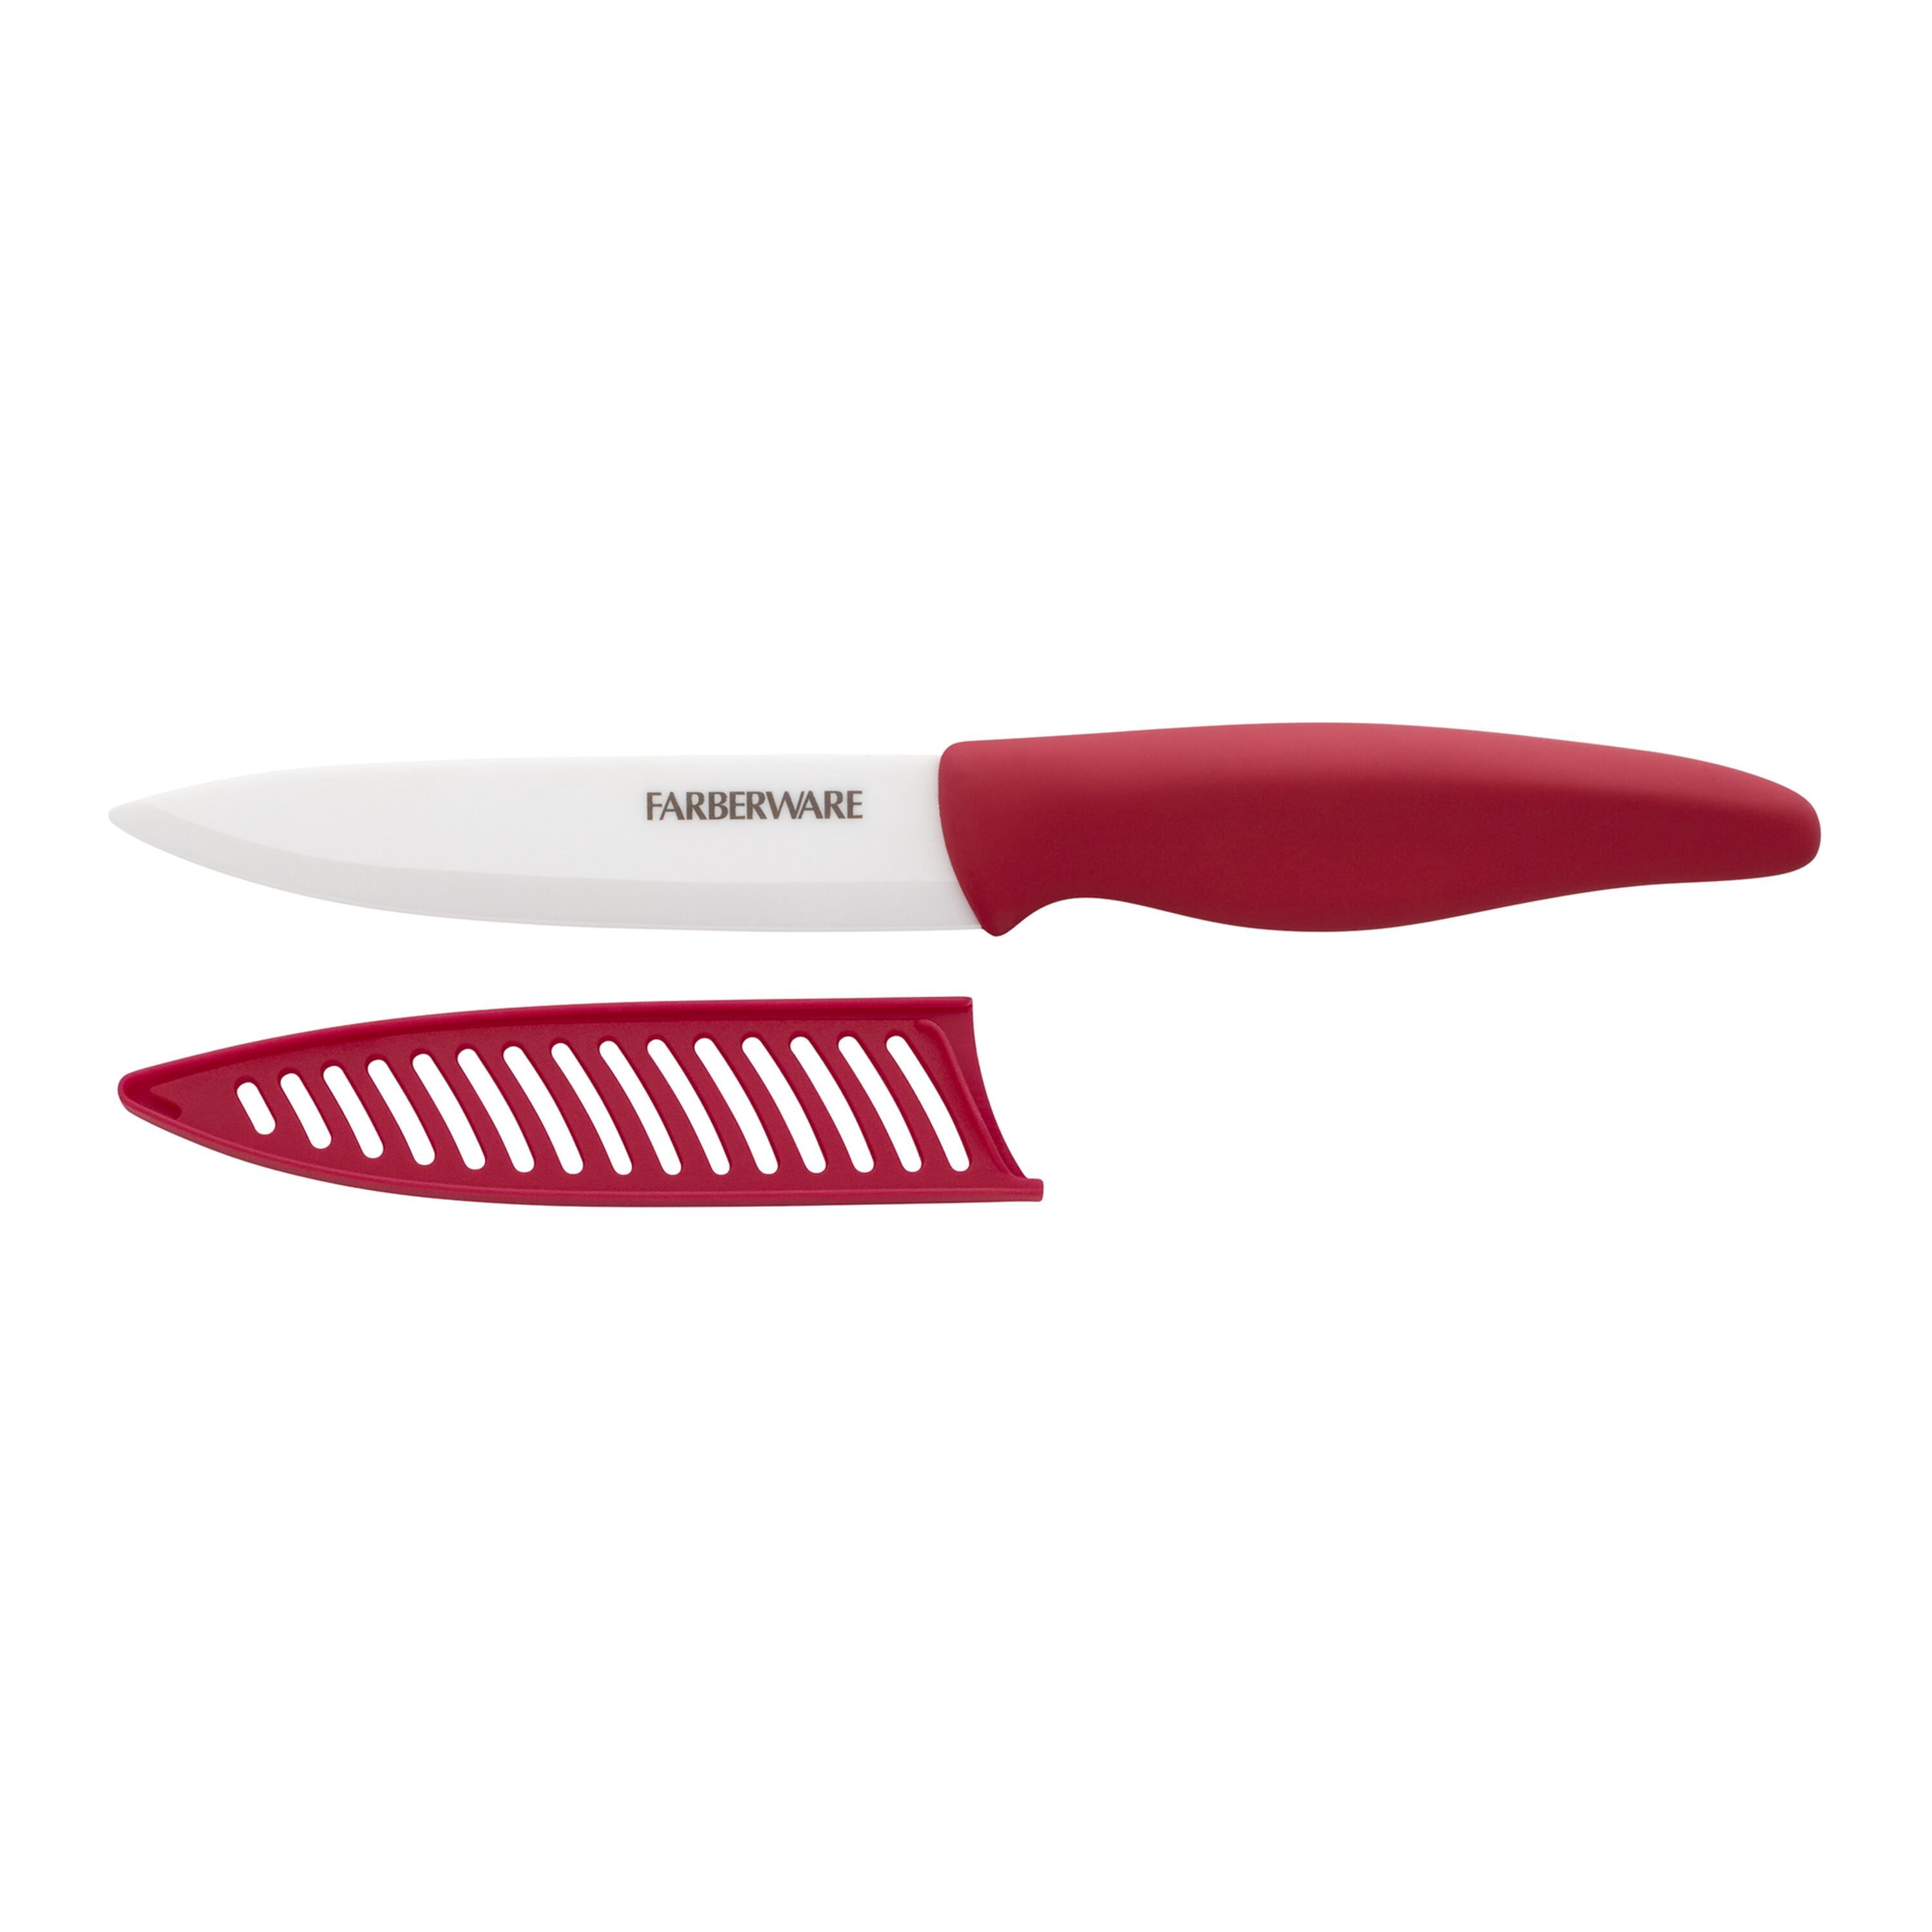 Farberware Professional 5-inch Ceramic Utility Knife with Red Blade Cover and Handle